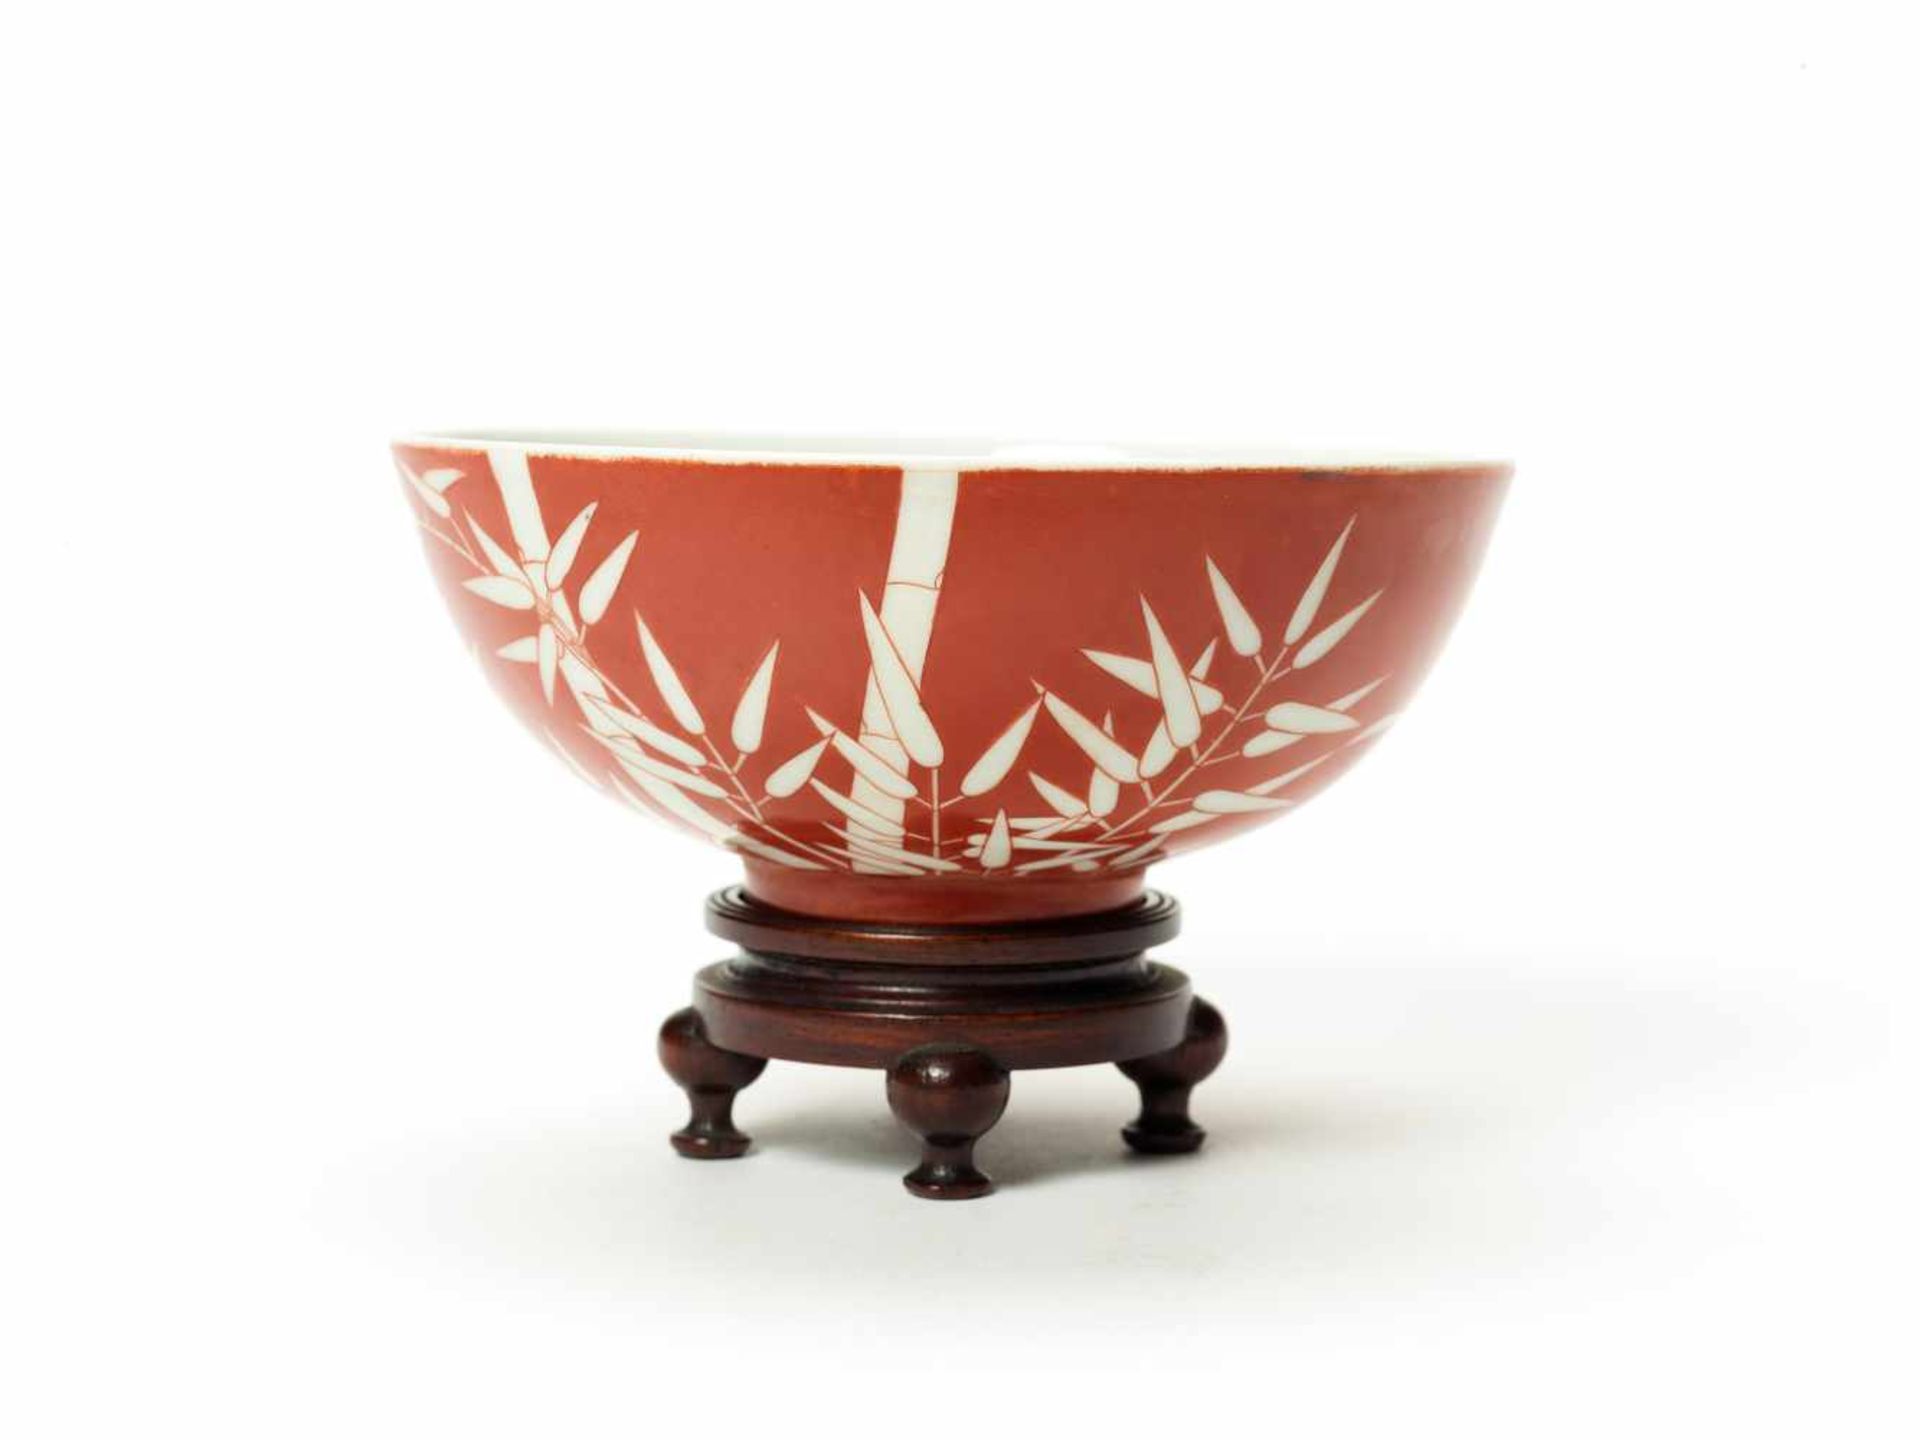 A CORAL-RED PAINTED PORCELAIN BOWL WITH BAMBOO DECORATIONPorcelainChina, Qing dynastyThe fine and